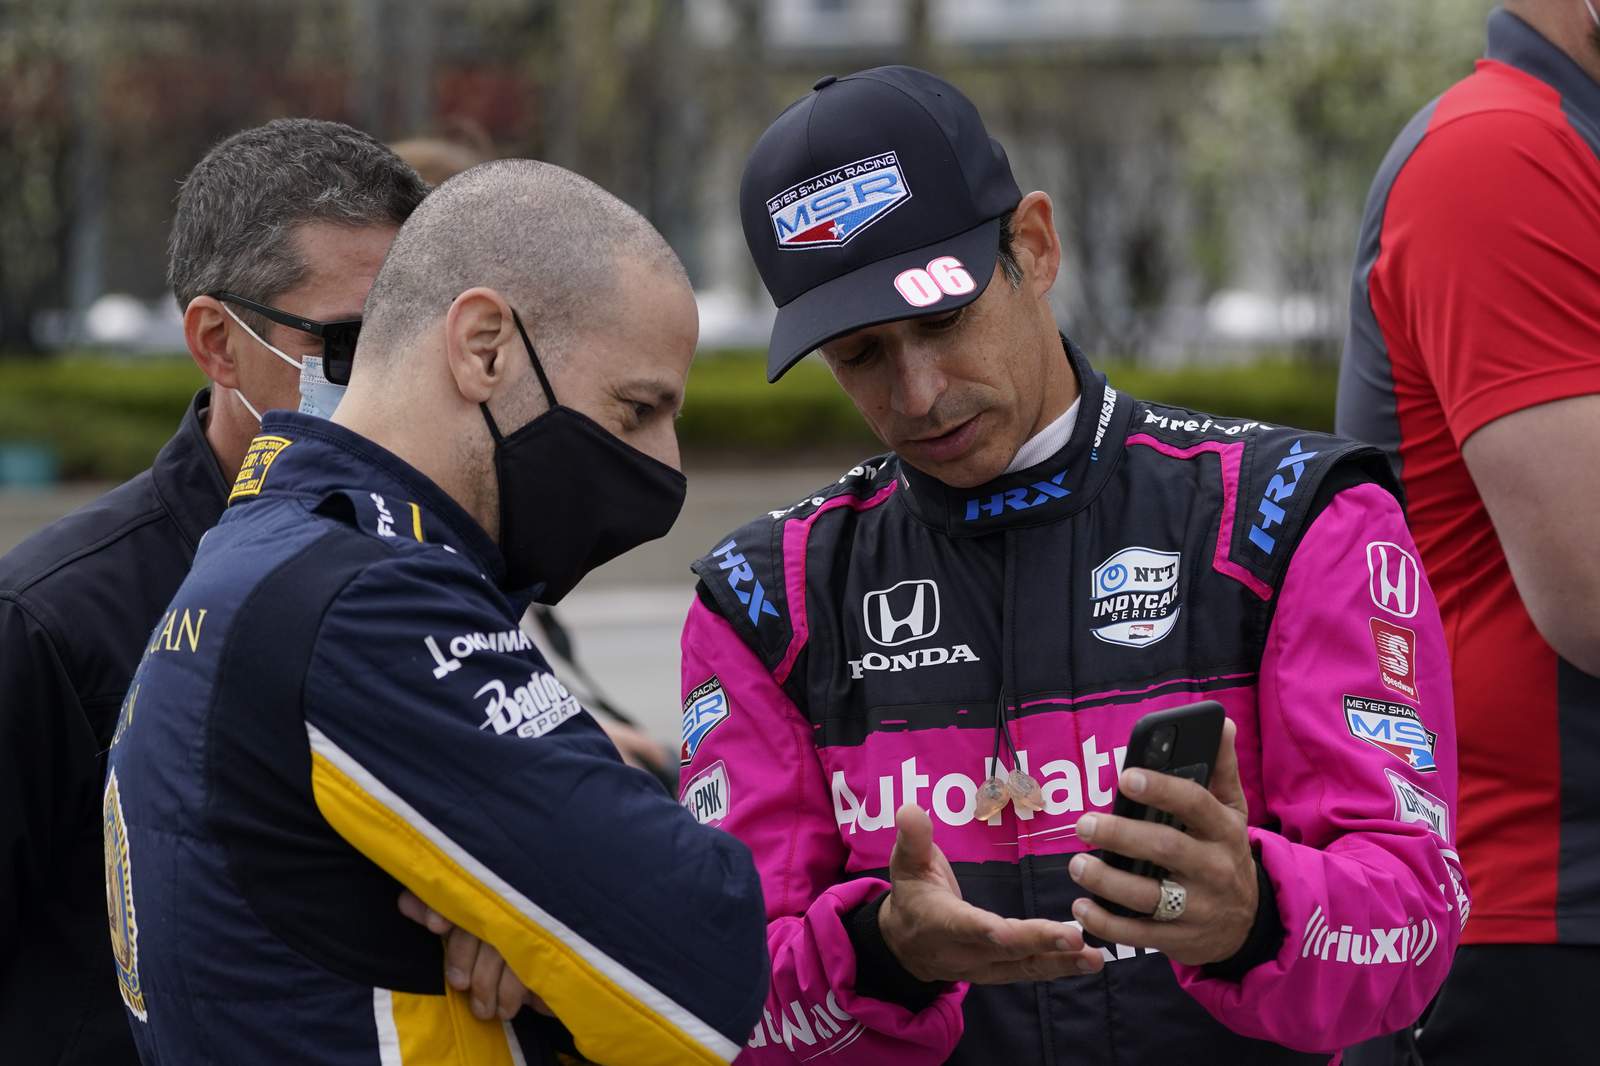 Castroneves starts getting acclimated to new team, color